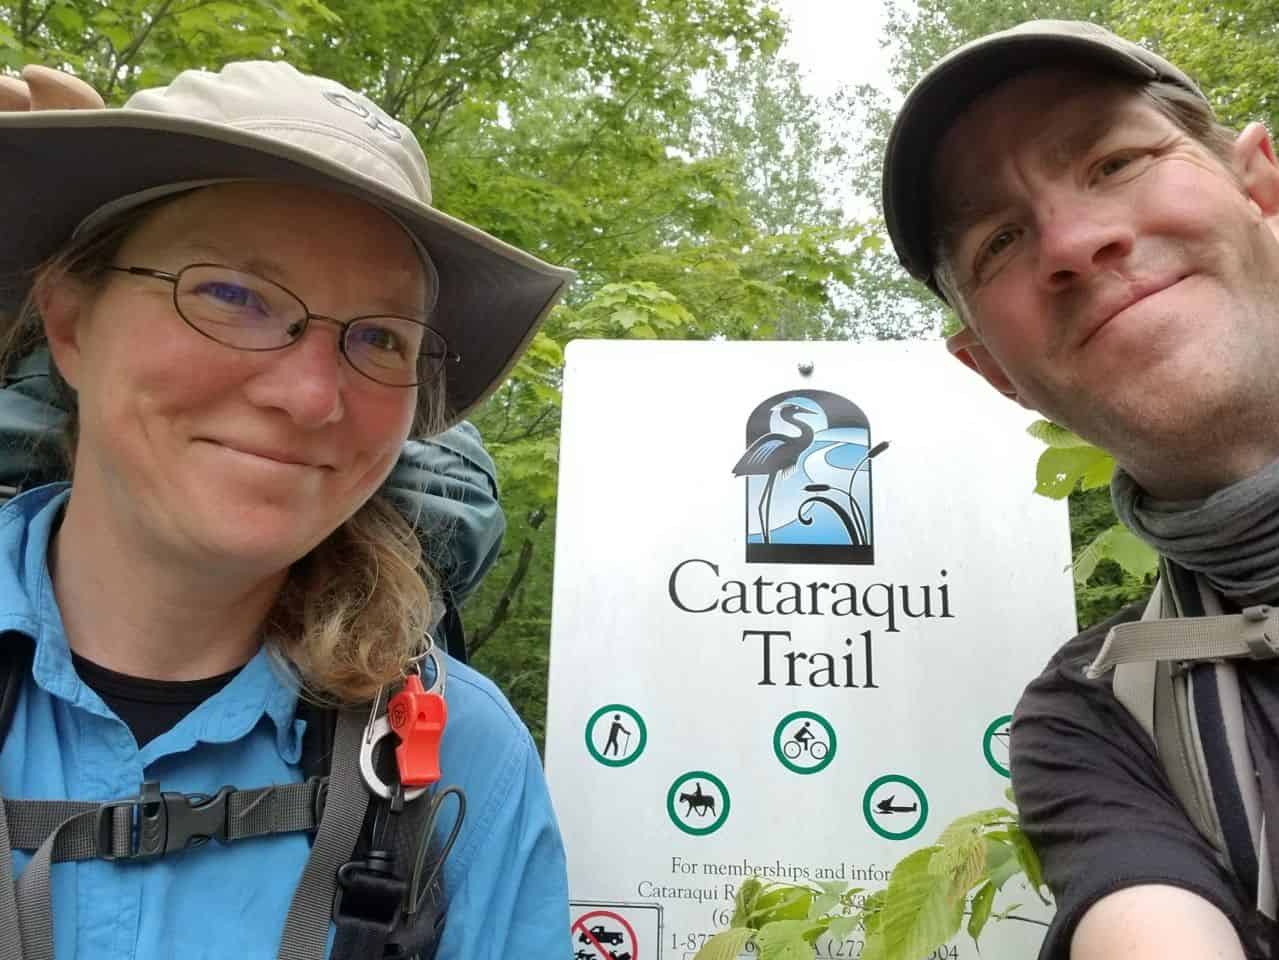 Come Walk With Us on the Cataraqui Trail section of the Trans Canada Trail in Ontario